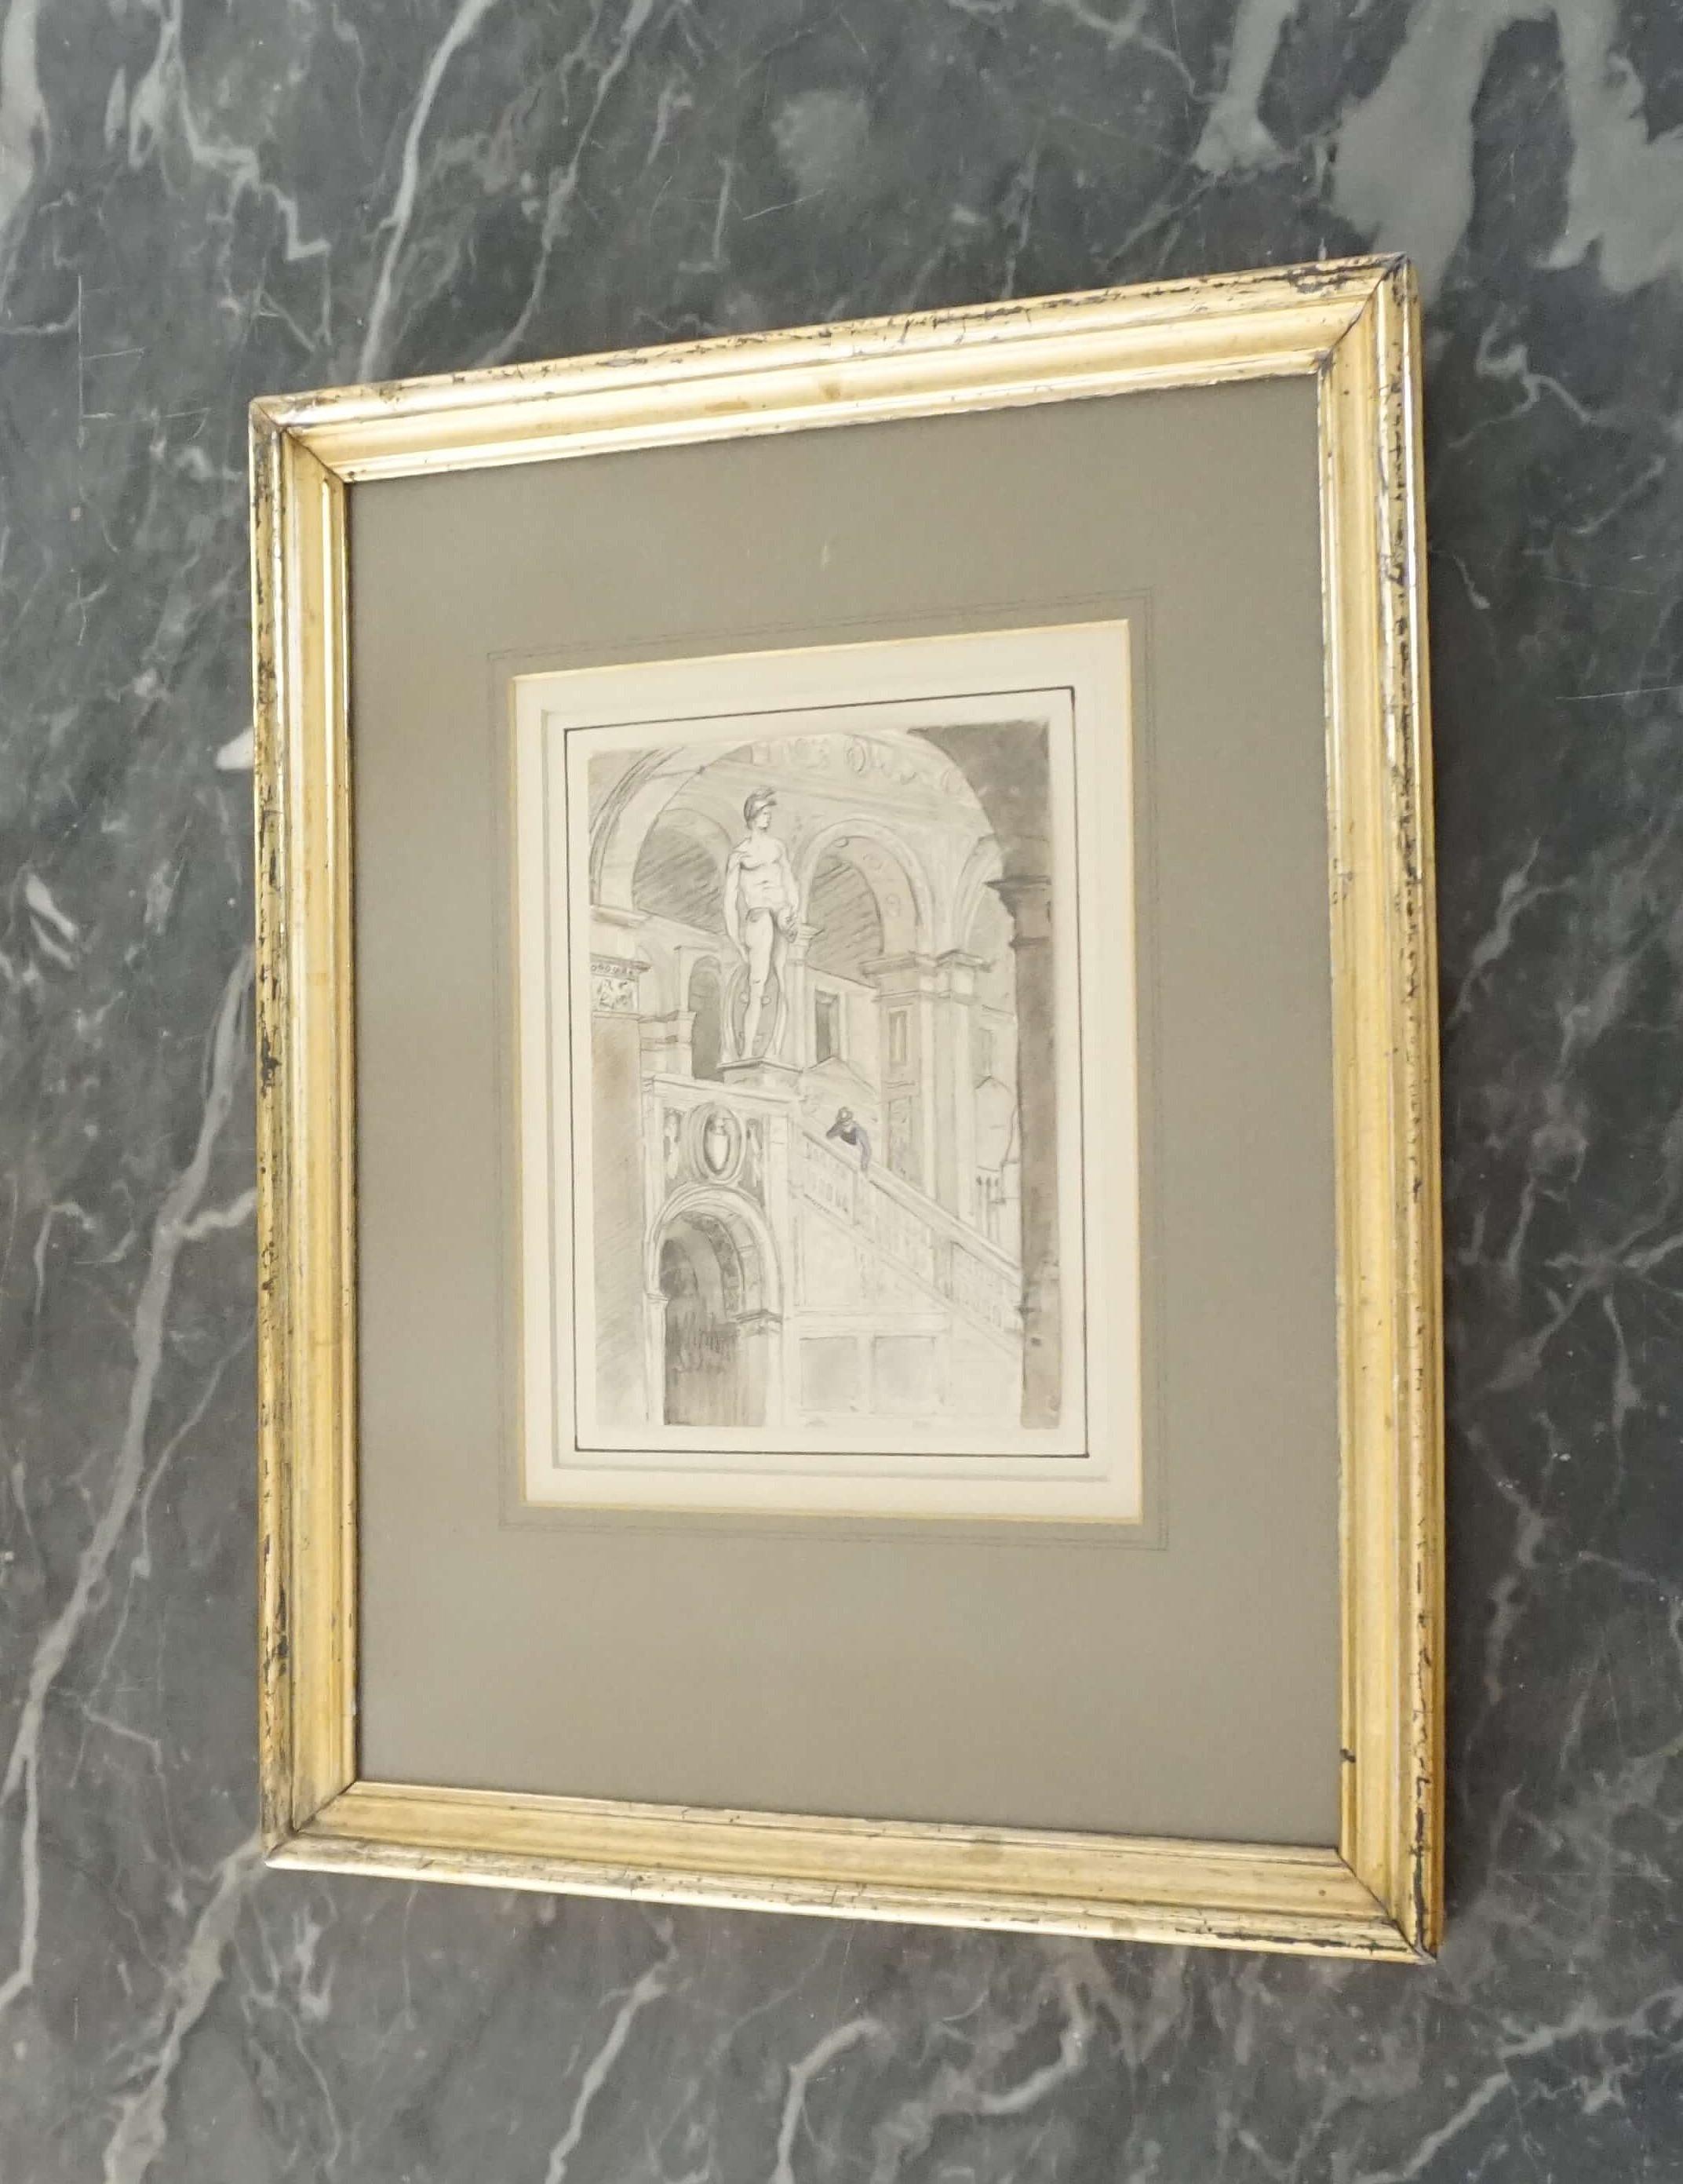 Grand Tour Charcoal and Watercolor Architectural Drawing, circa 1800 In Good Condition For Sale In Kinderhook, NY